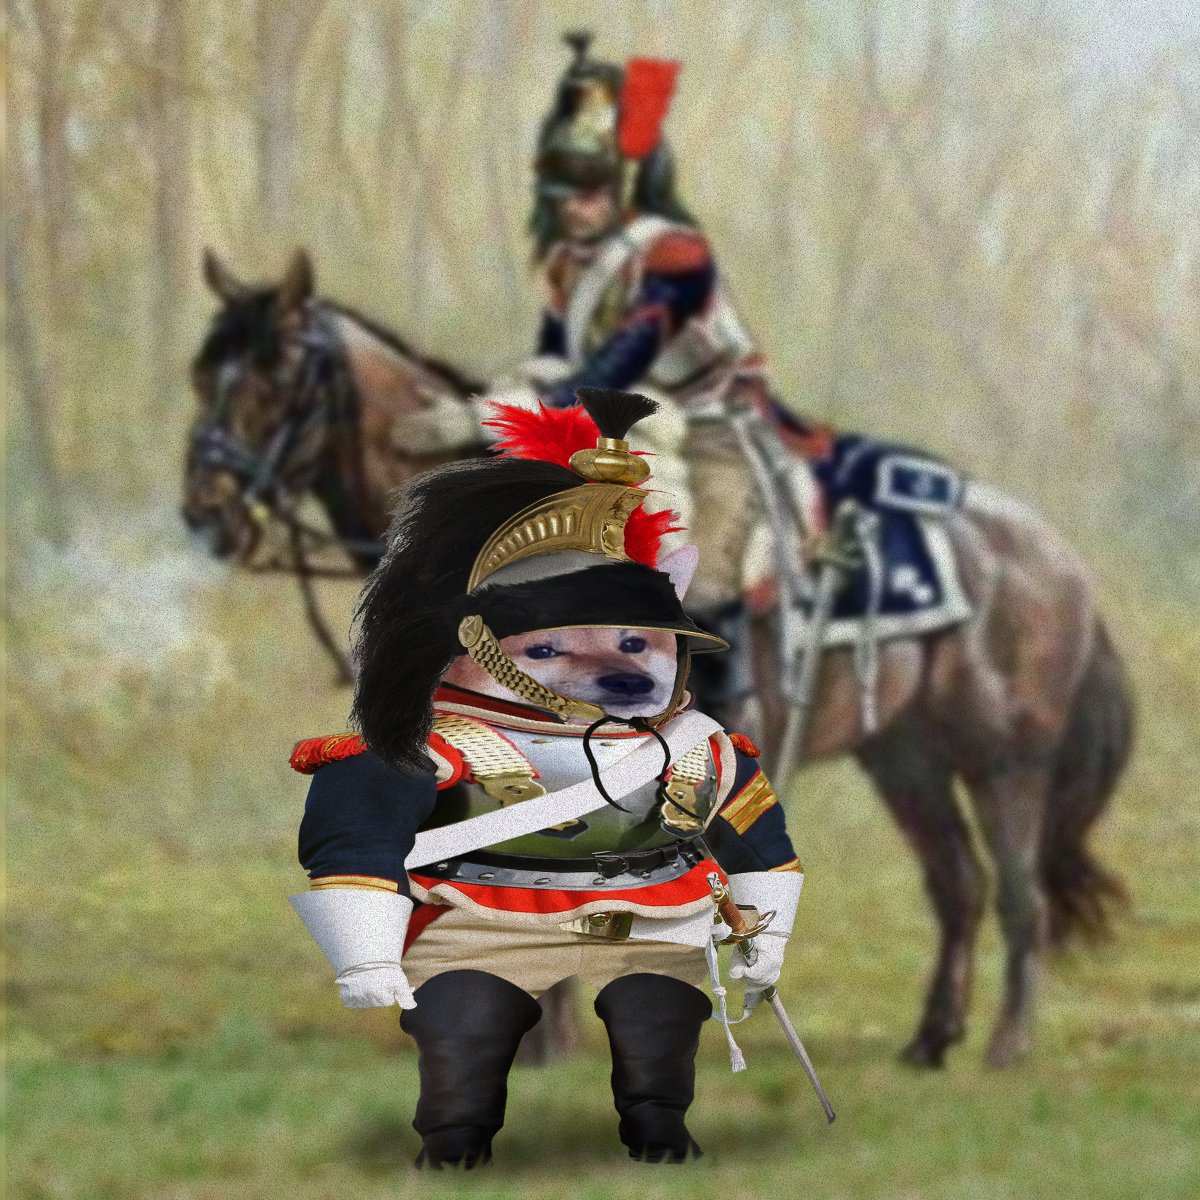 #FellaDelivery for @Pixies1873  One Imperial Army Cuirassier is ready to bonk from horseback... as soon as he locates his horse... Welcome to #NAFO #NAFOfellas #NAFOExpansionIsNonNegotiable 

@Kama_Kamilia @goblin__soup @Official_NAFO